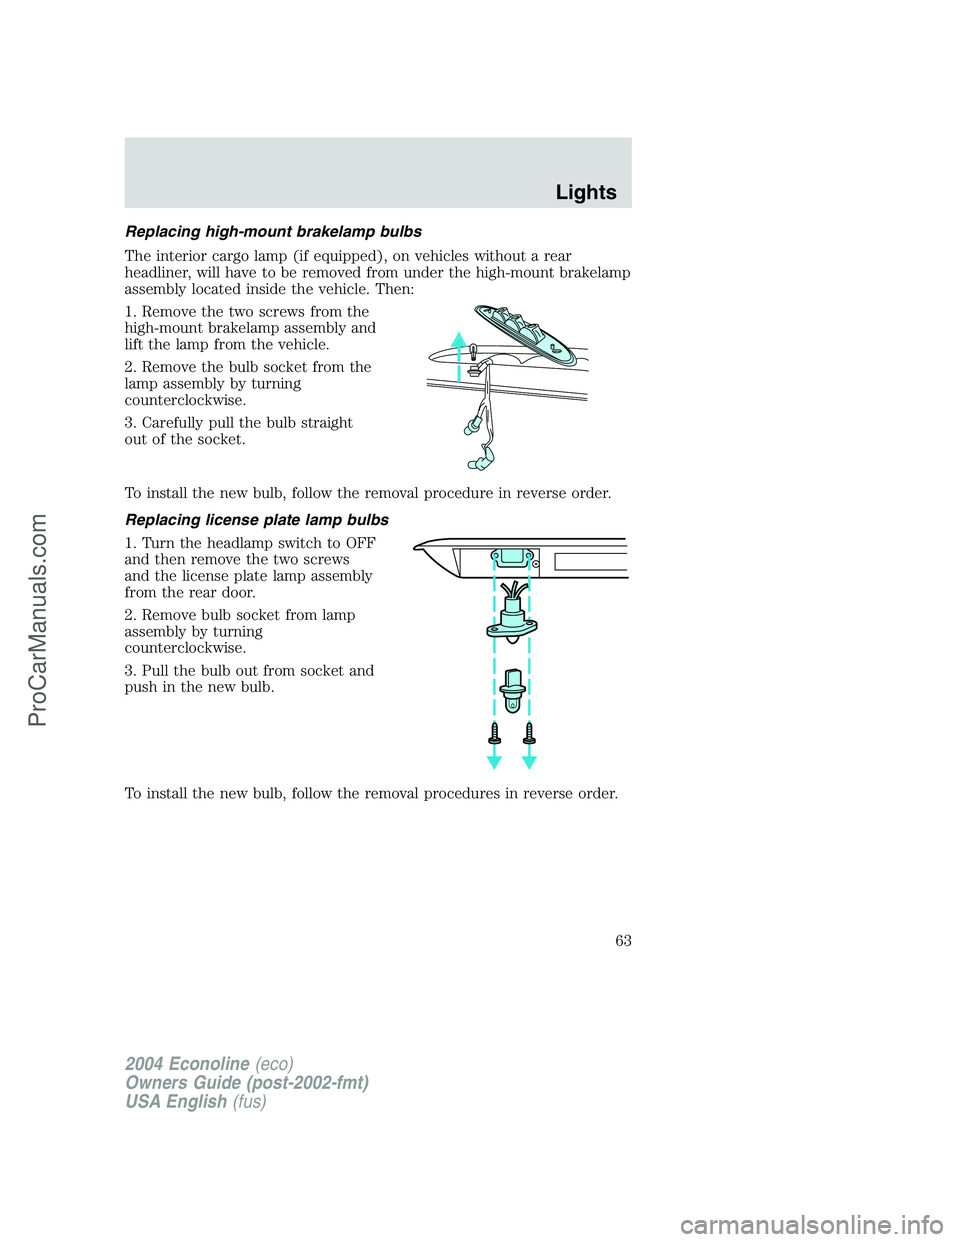 FORD E-350 2004  Owners Manual Replacing high-mount brakelamp bulbs
The interior cargo lamp (if equipped), on vehicles without a rear
headliner, will have to be removed from under the high-mount brakelamp
assembly located inside th